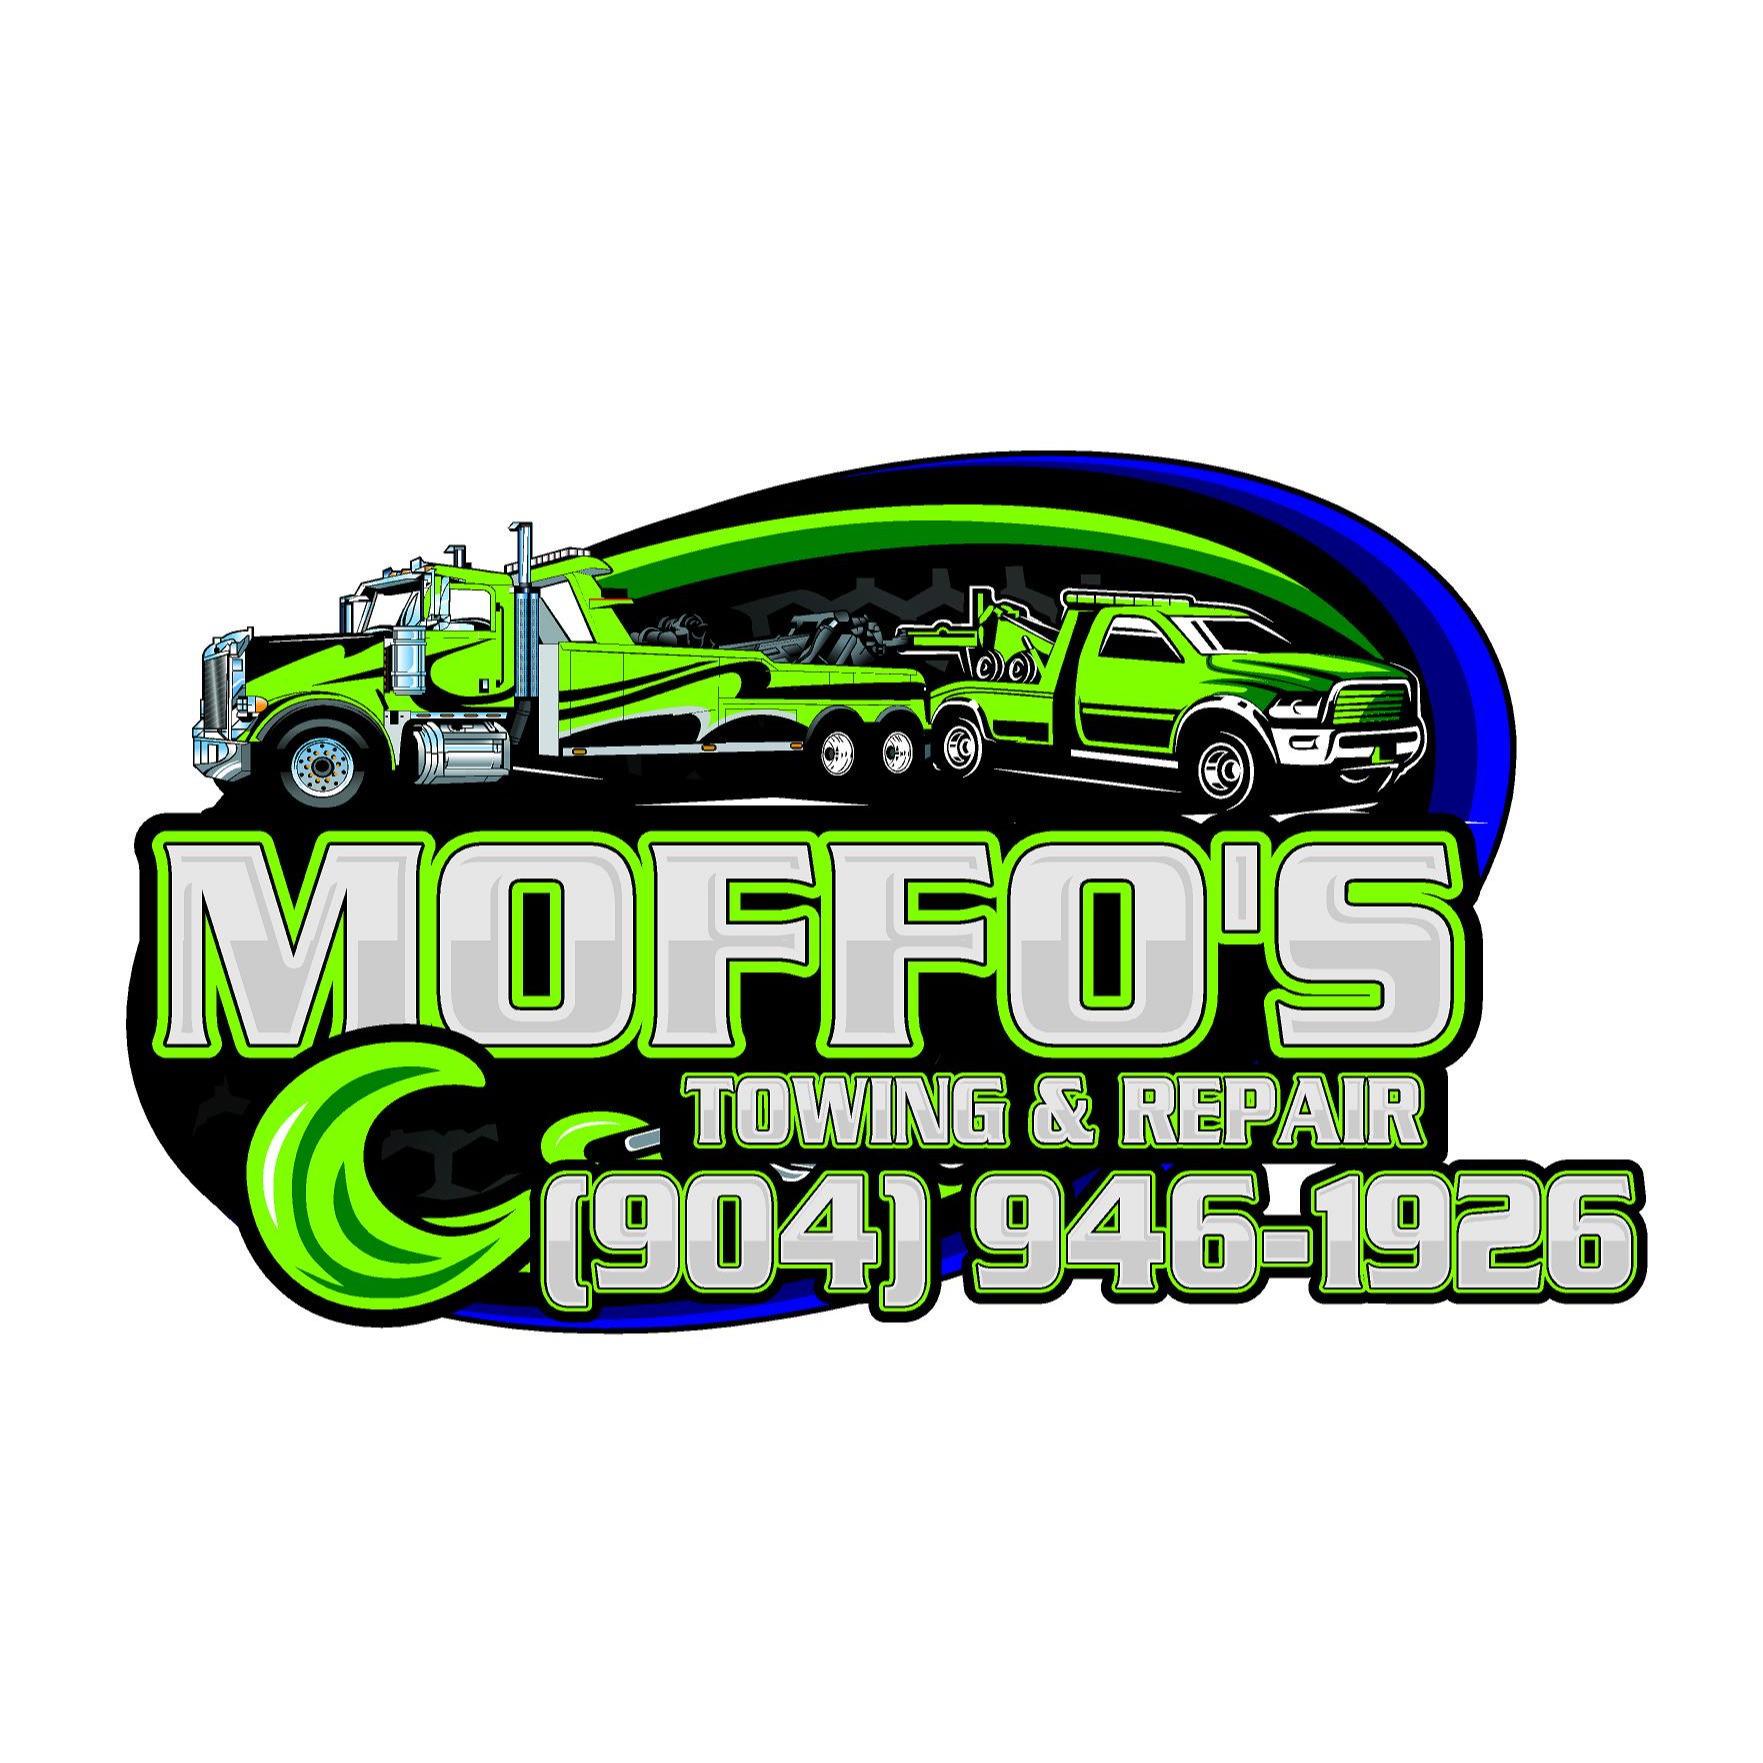 At Moffo's Towing & Repair, we're more than just a towing company – we're your dependable roadside a Moffo's Towing & Repair Jacksonville (904)946-1926